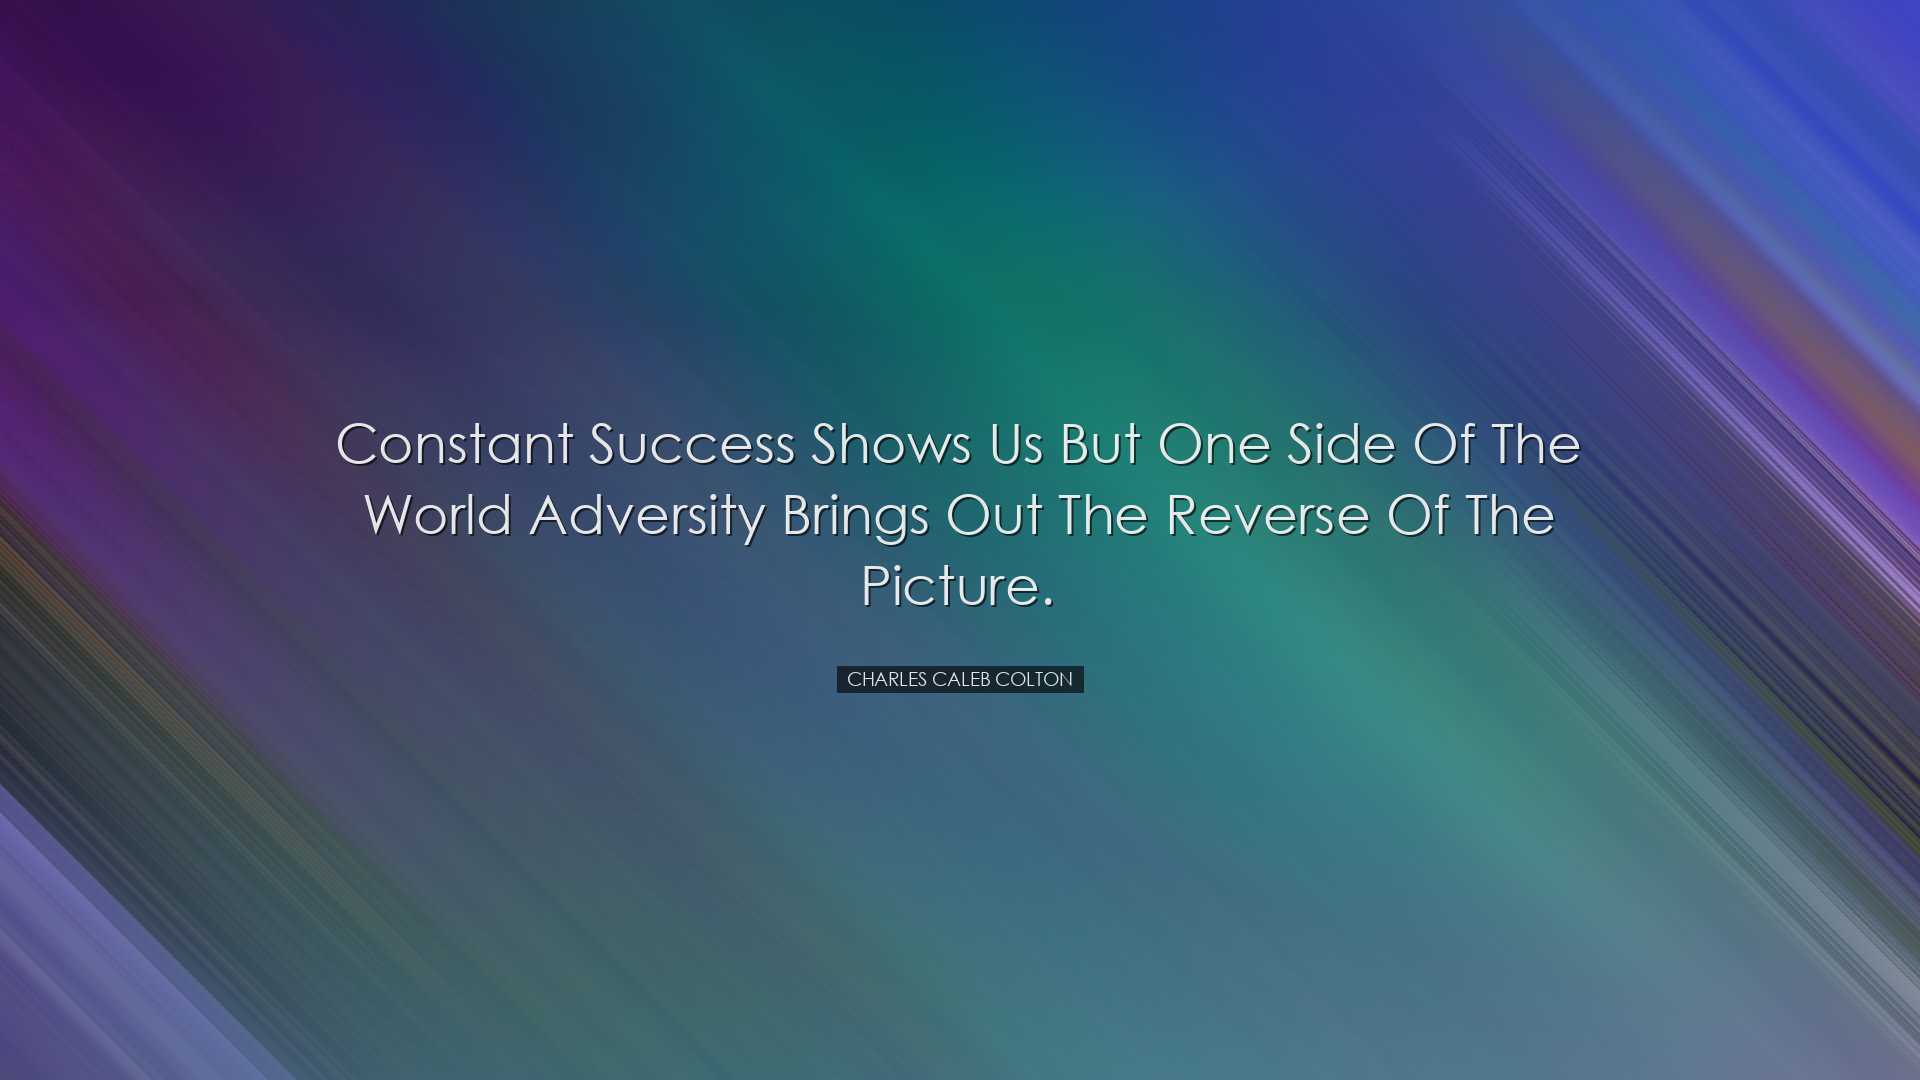 Constant success shows us but one side of the world adversity brin